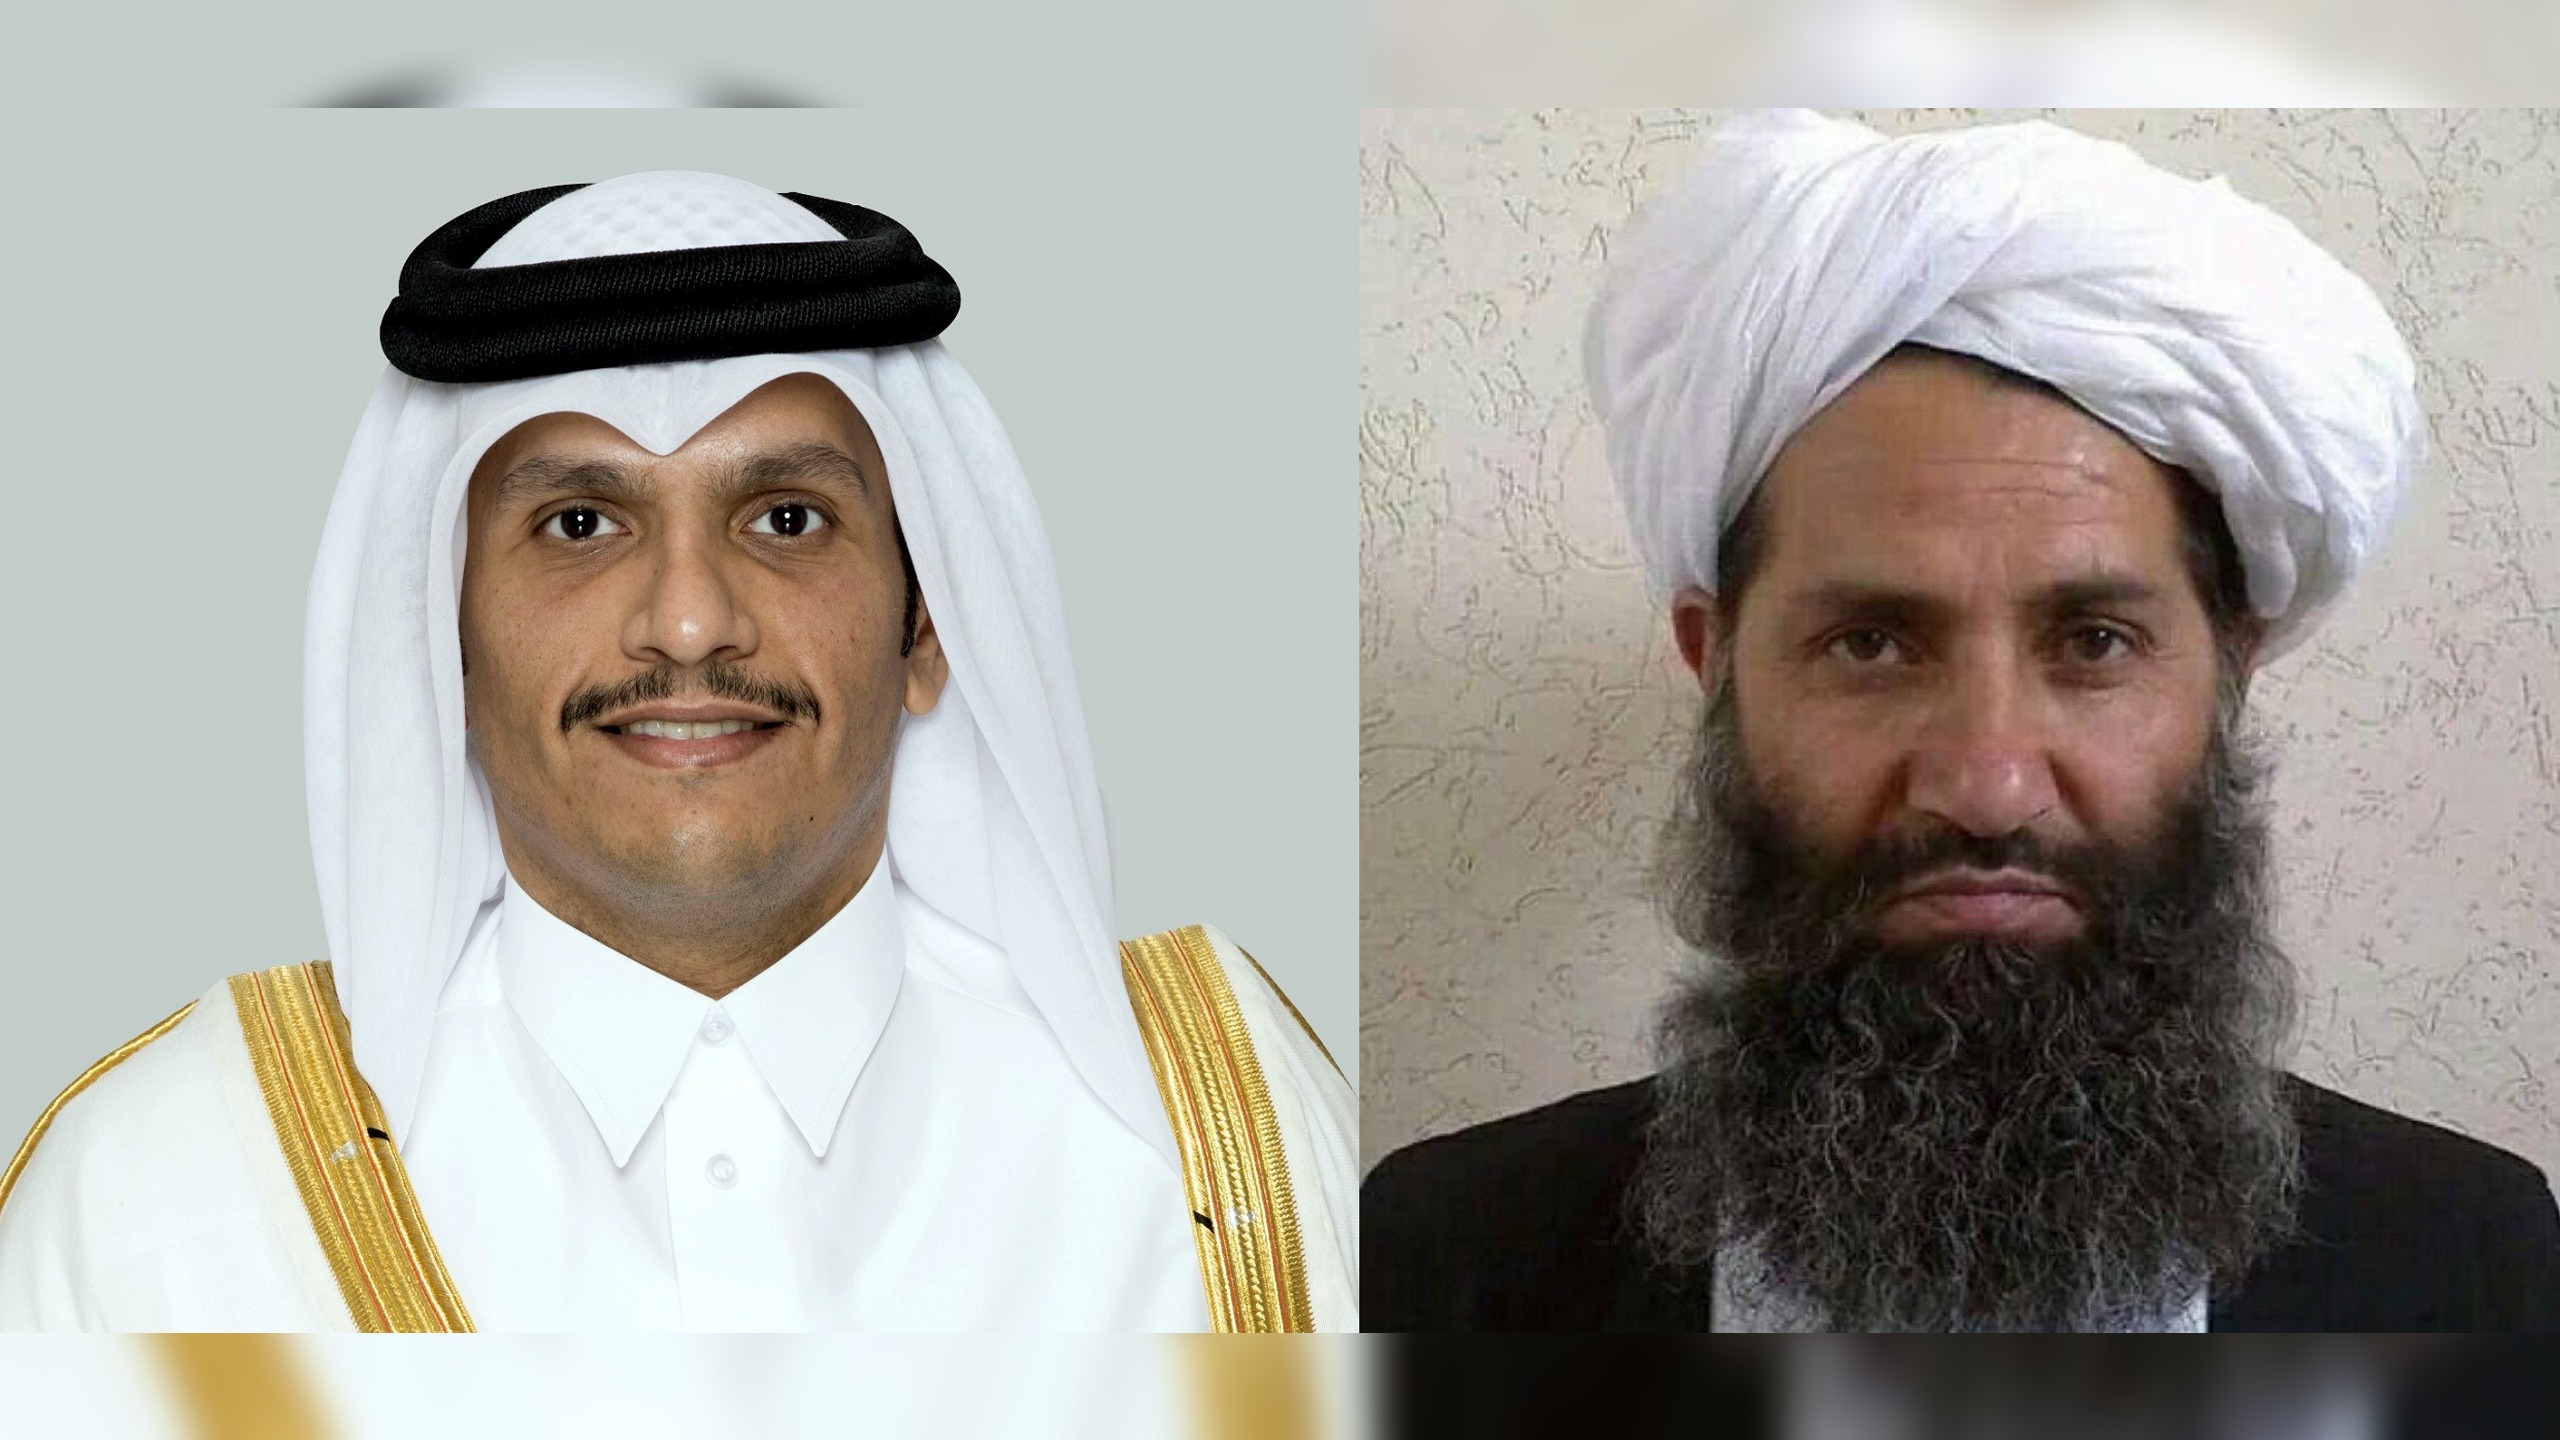 Taliban Supreme Leader Engages in Rare Meeting With Qatari PM